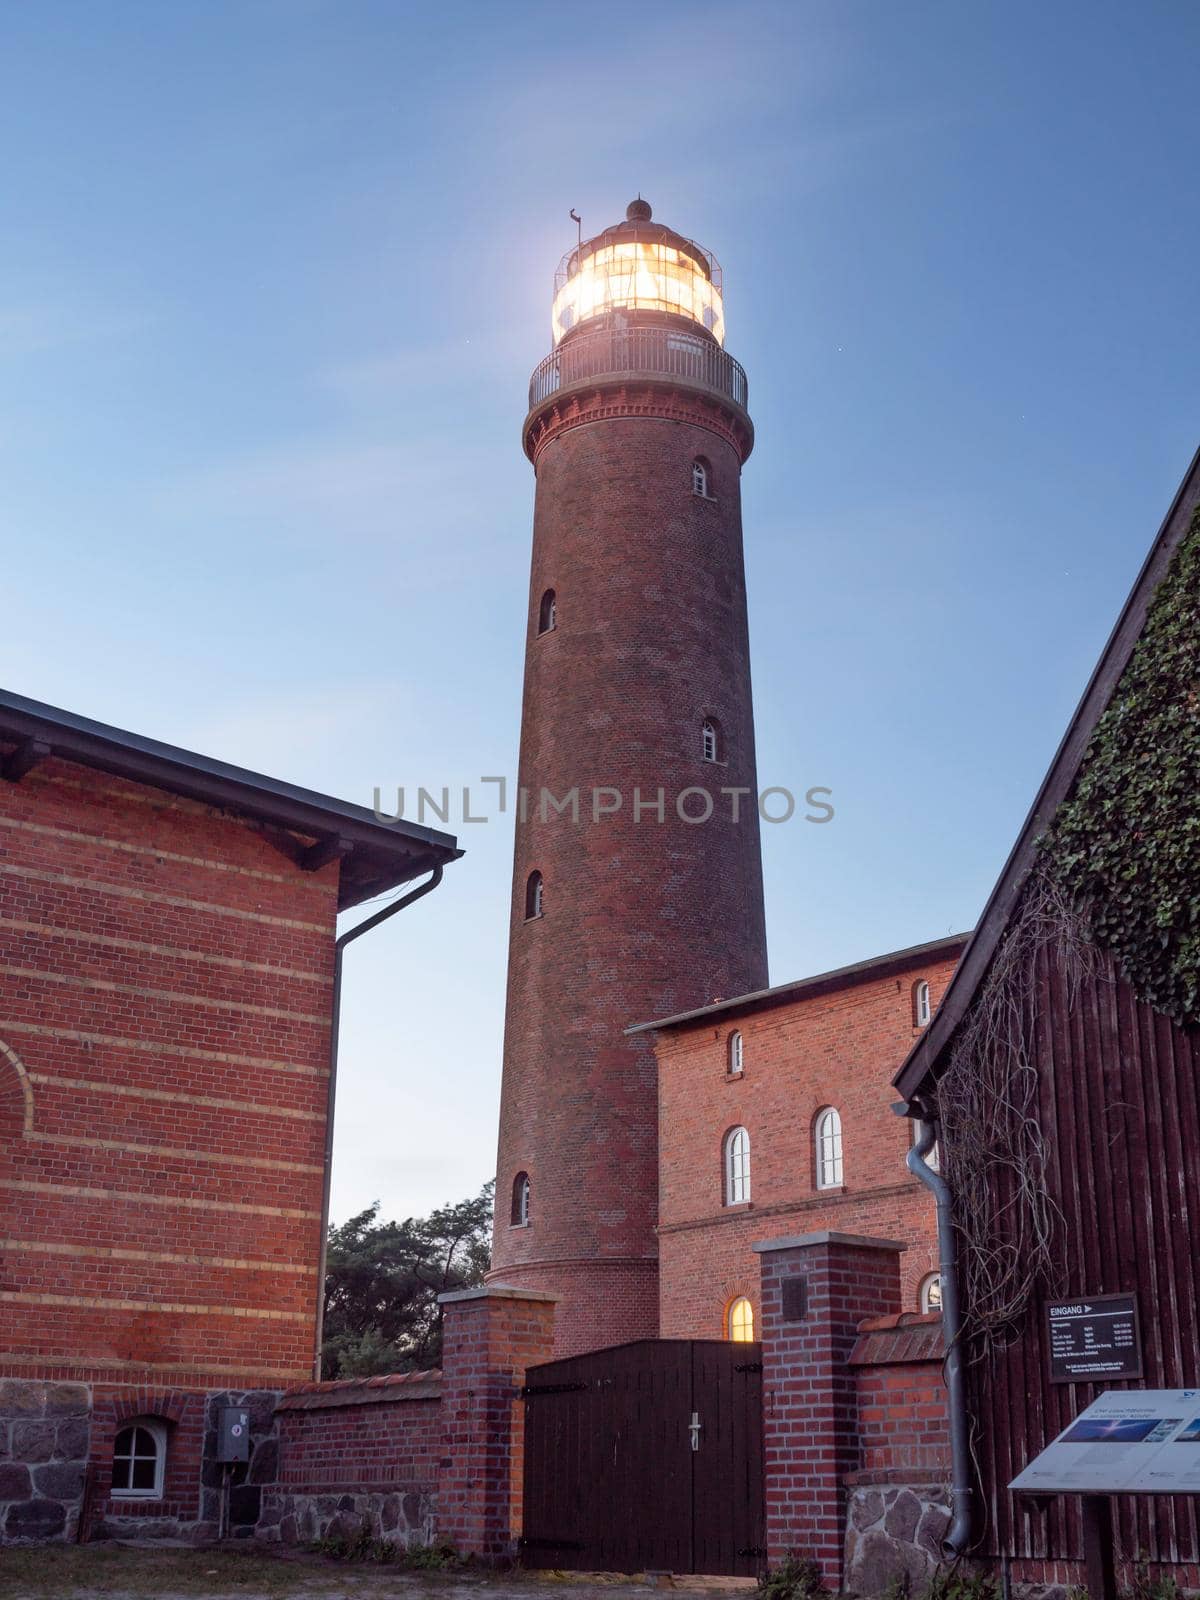 Shinning lighthouse in evening. Tower in park at Prerow built from red bricks. Tower illuminated with strong warning light dark sky in background.